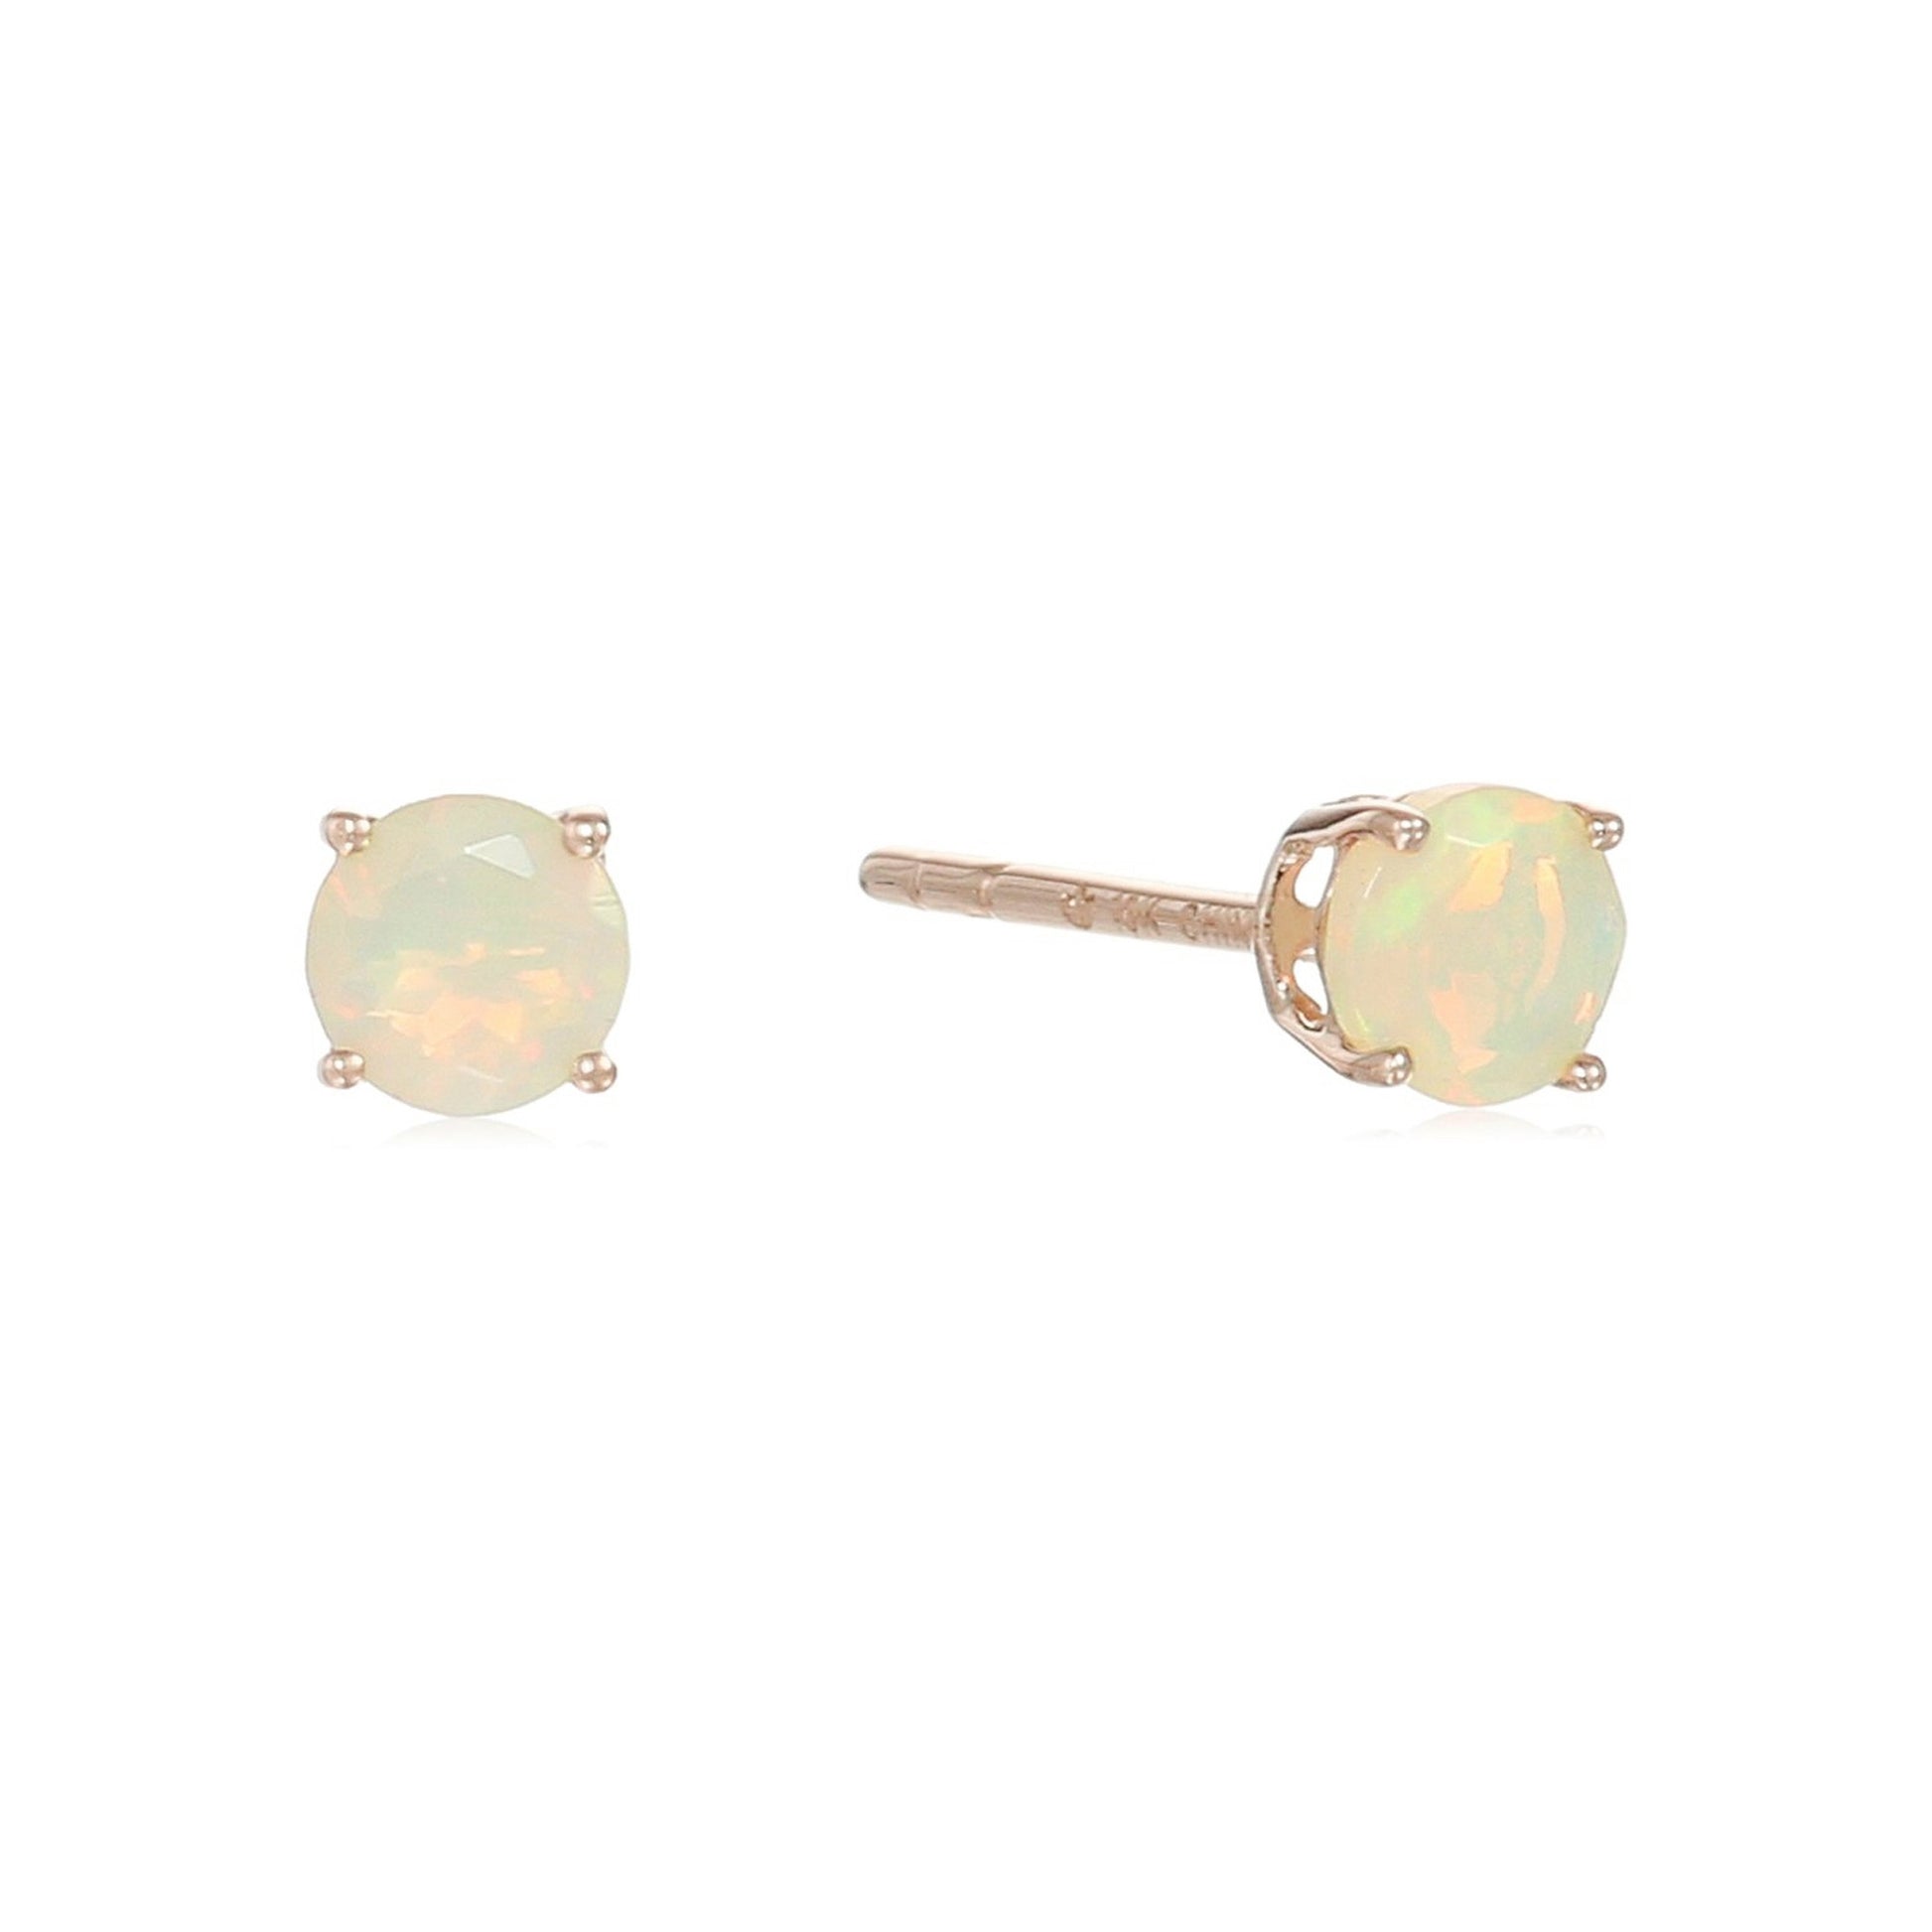 Solid 10K Yellow, White or Rose Gold 4mm Round Genuine Gemstone Birthstone Prong Set Stud Earrings For Women and Girls